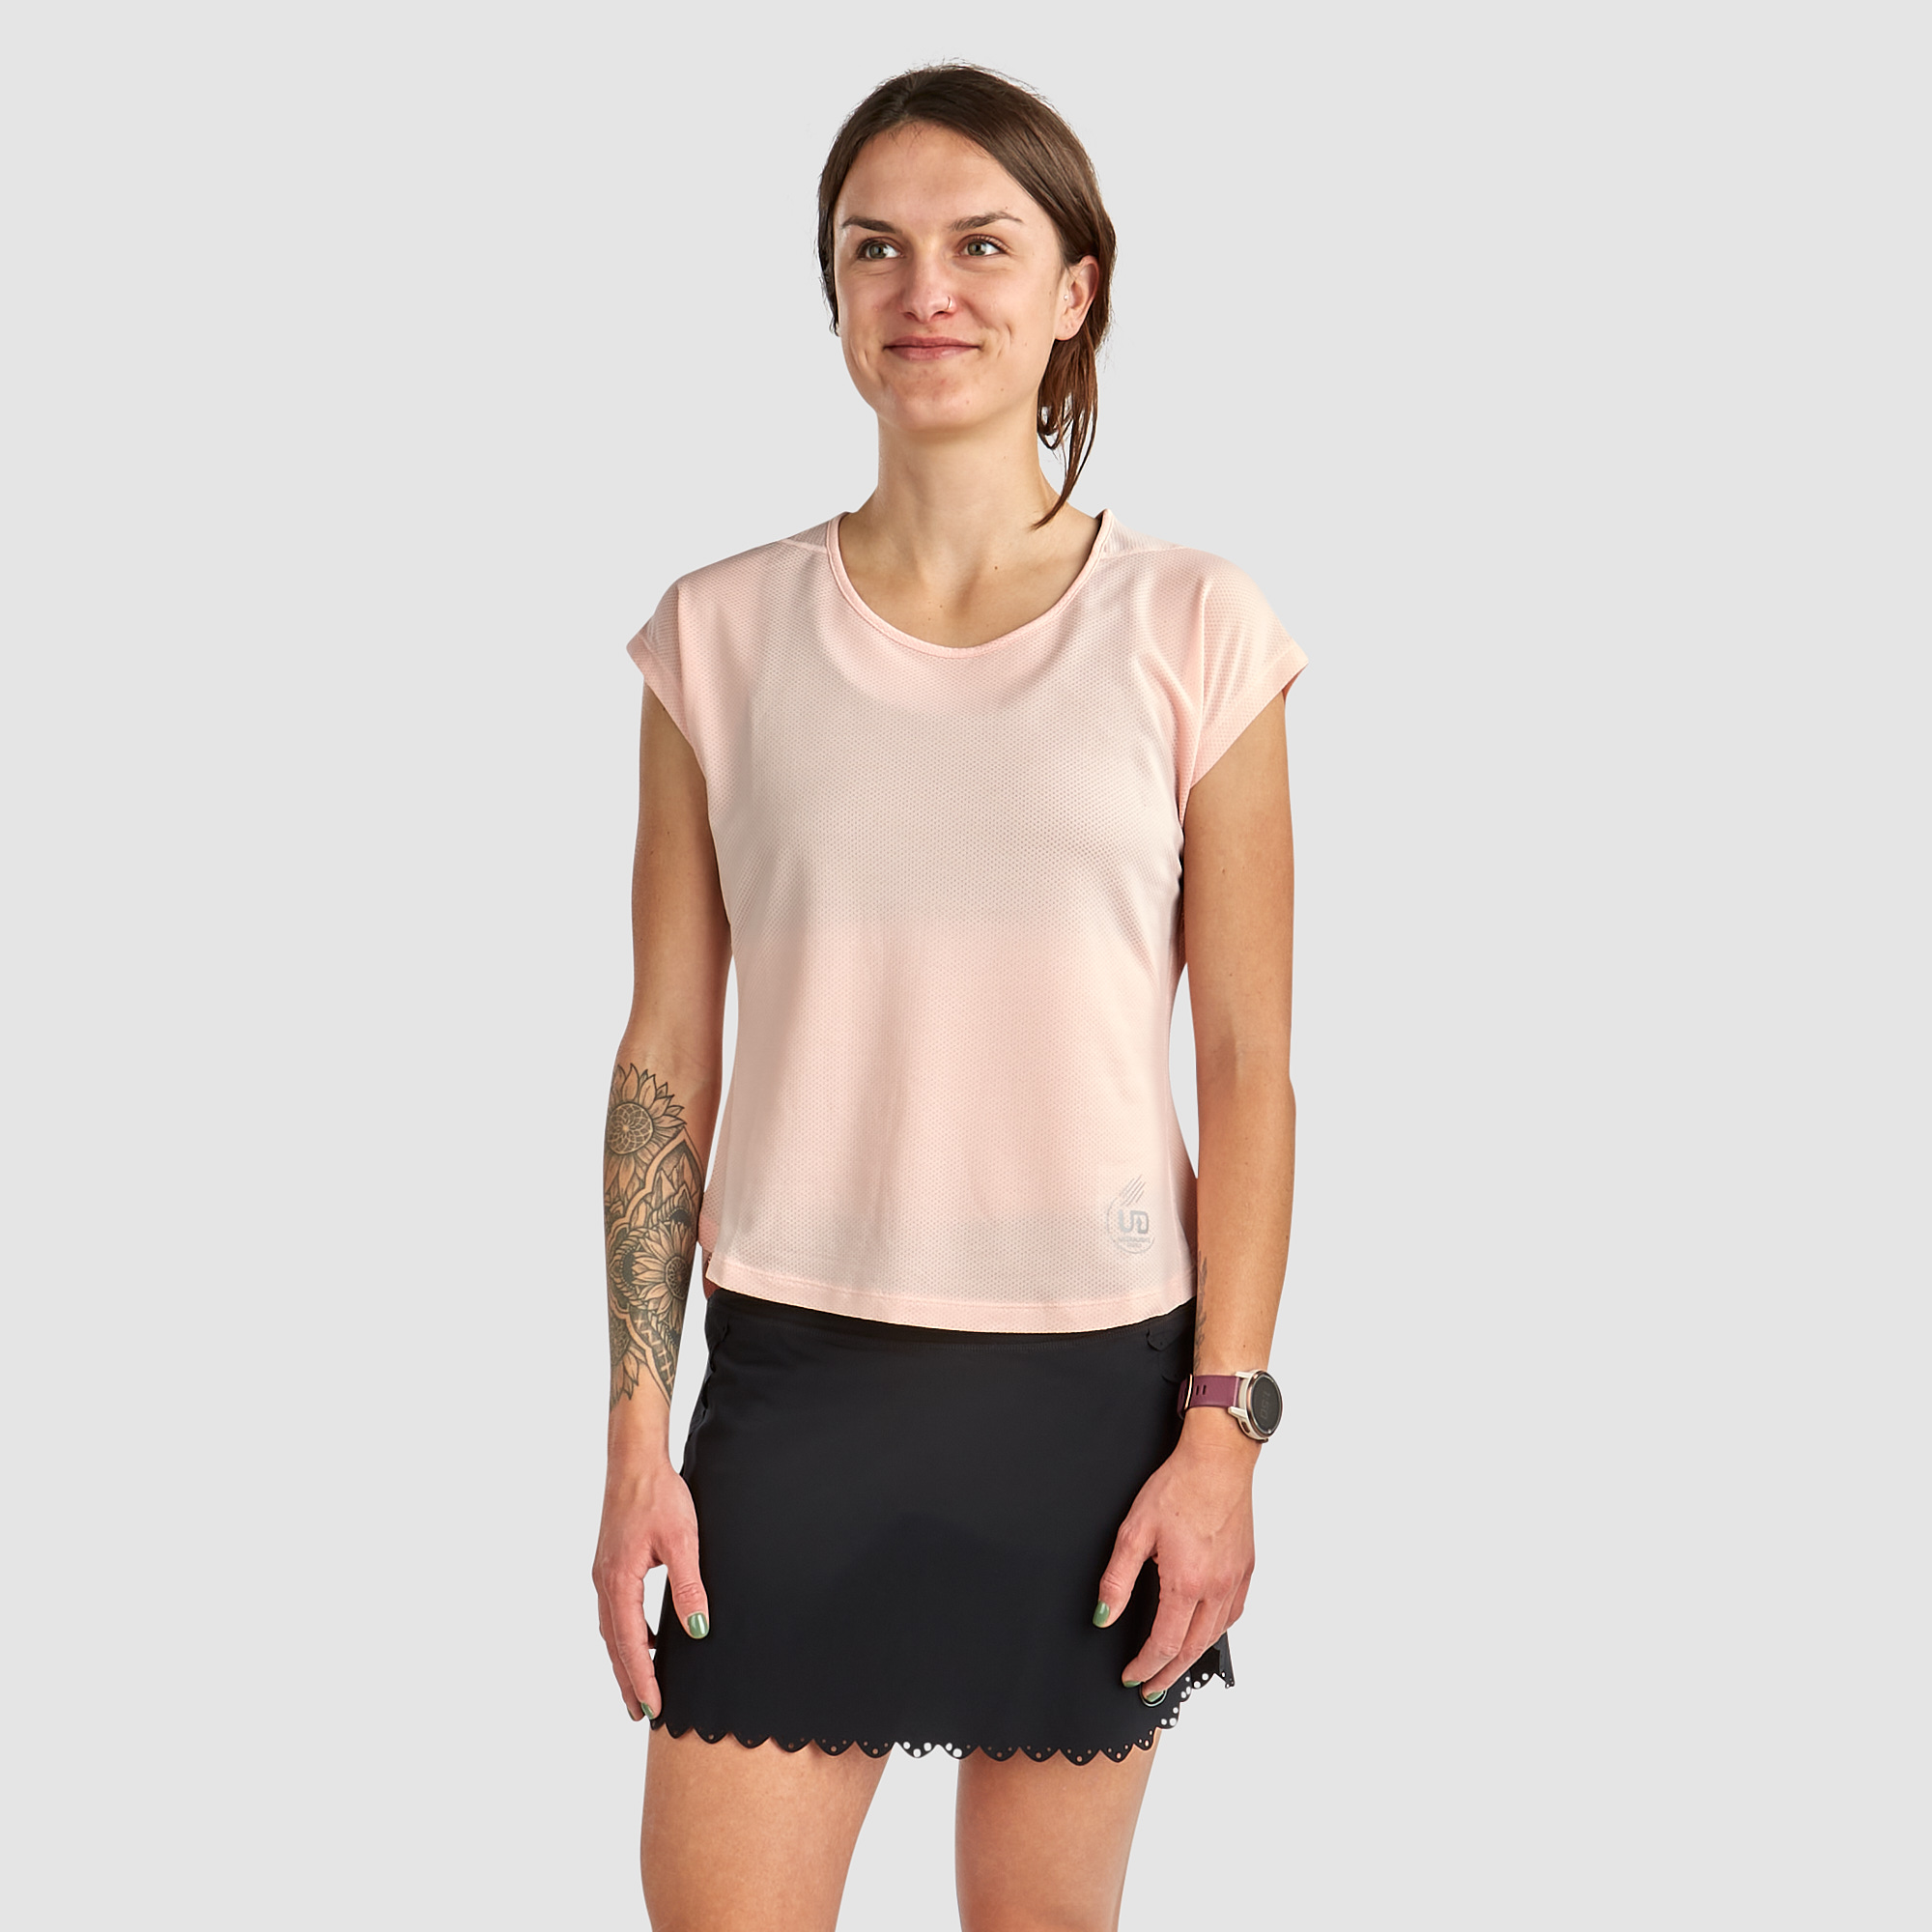 Ultimate Direction Women's Nimbus T-Shirt - Prior Year in Millennial Pink Size XL